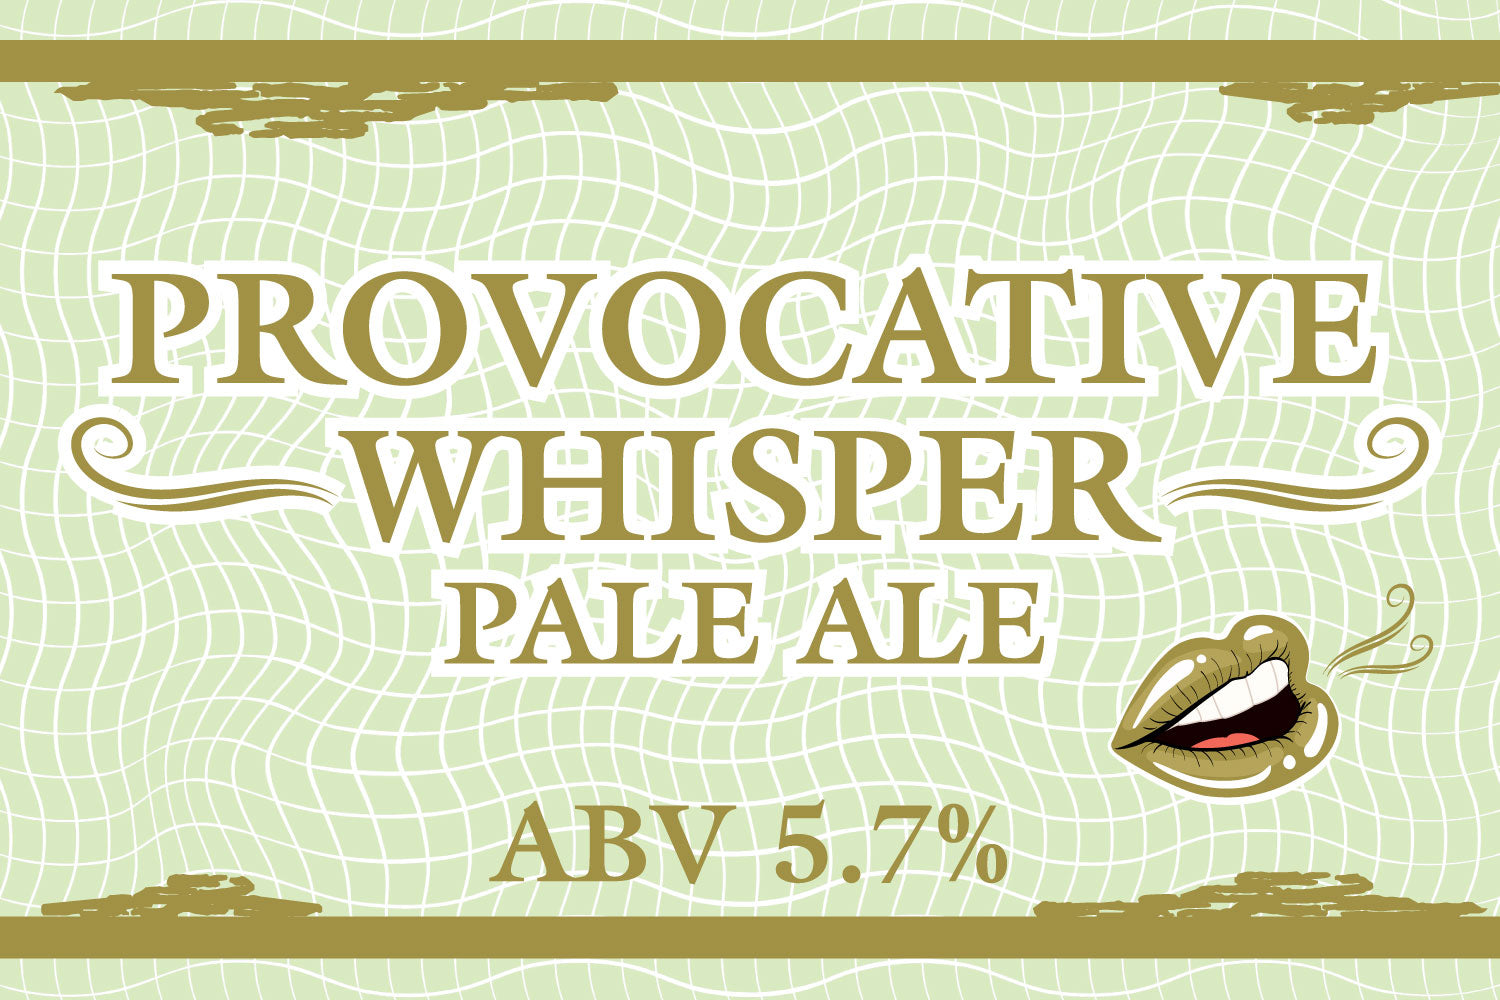 Provocative Whisper beer sign with ABV